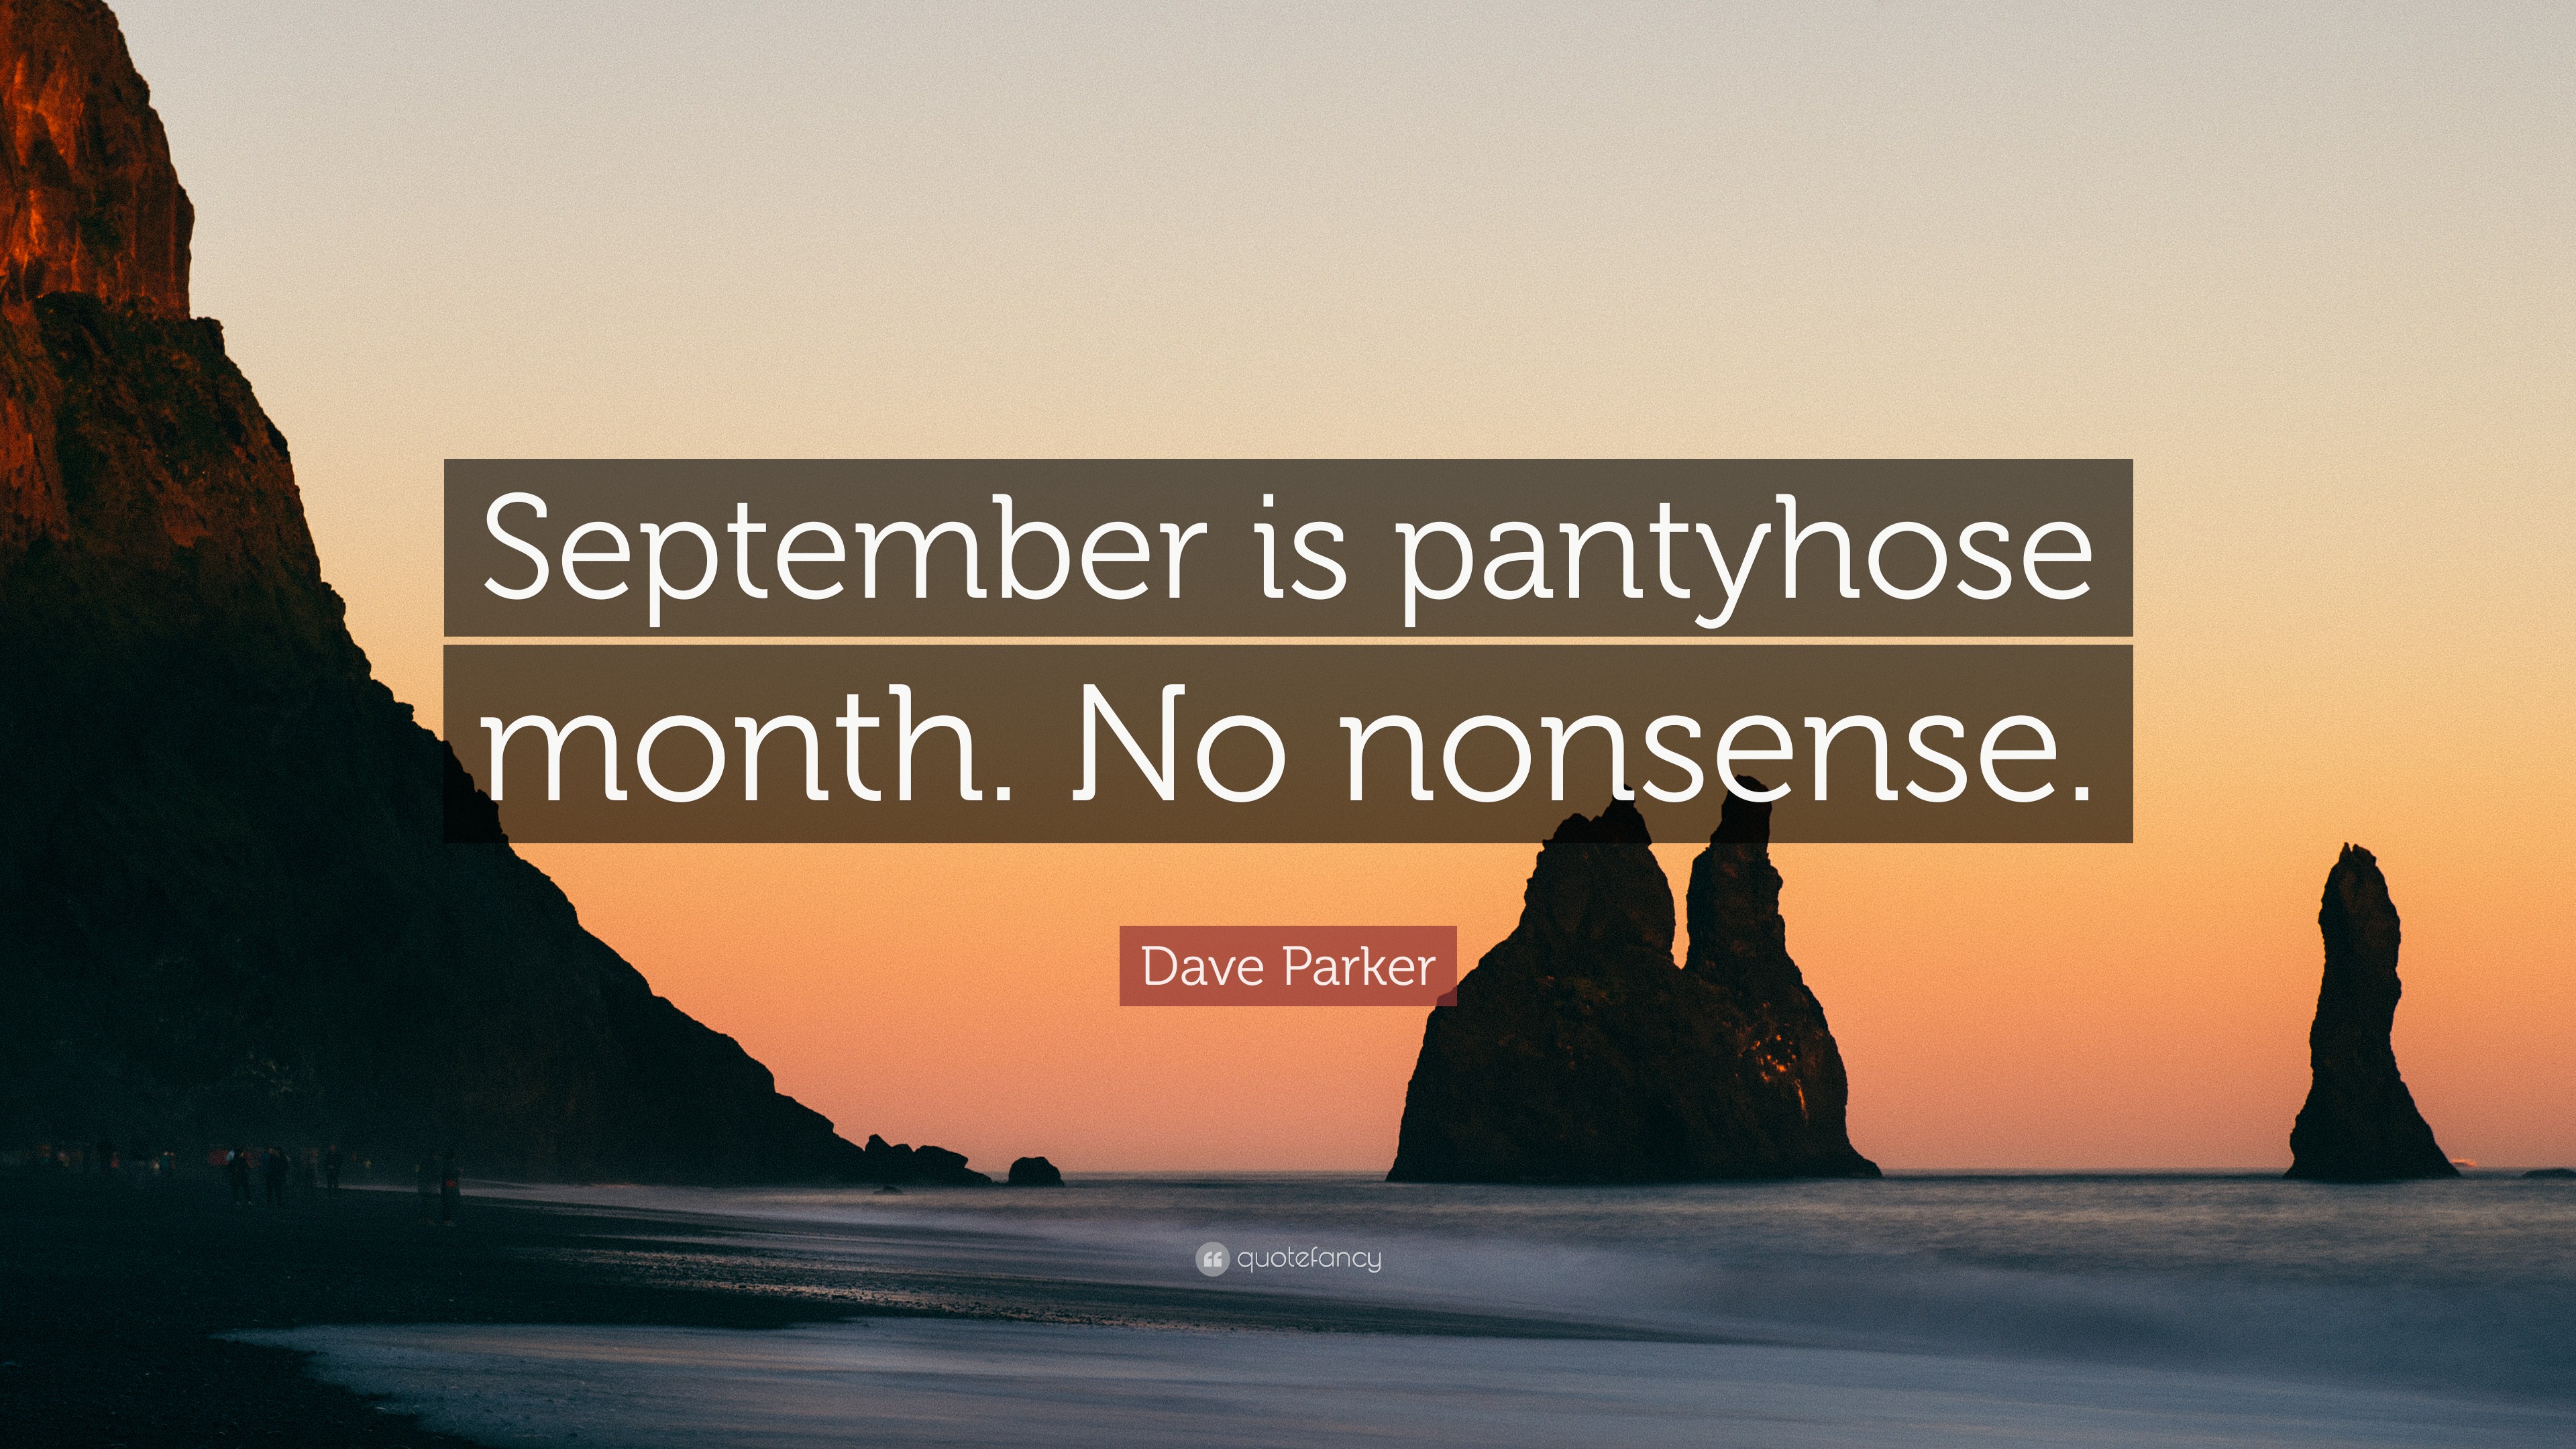 https://quotefancy.com/media/wallpaper/3840x2160/4867332-Dave-Parker-Quote-September-is-pantyhose-month-No-nonsense.jpg